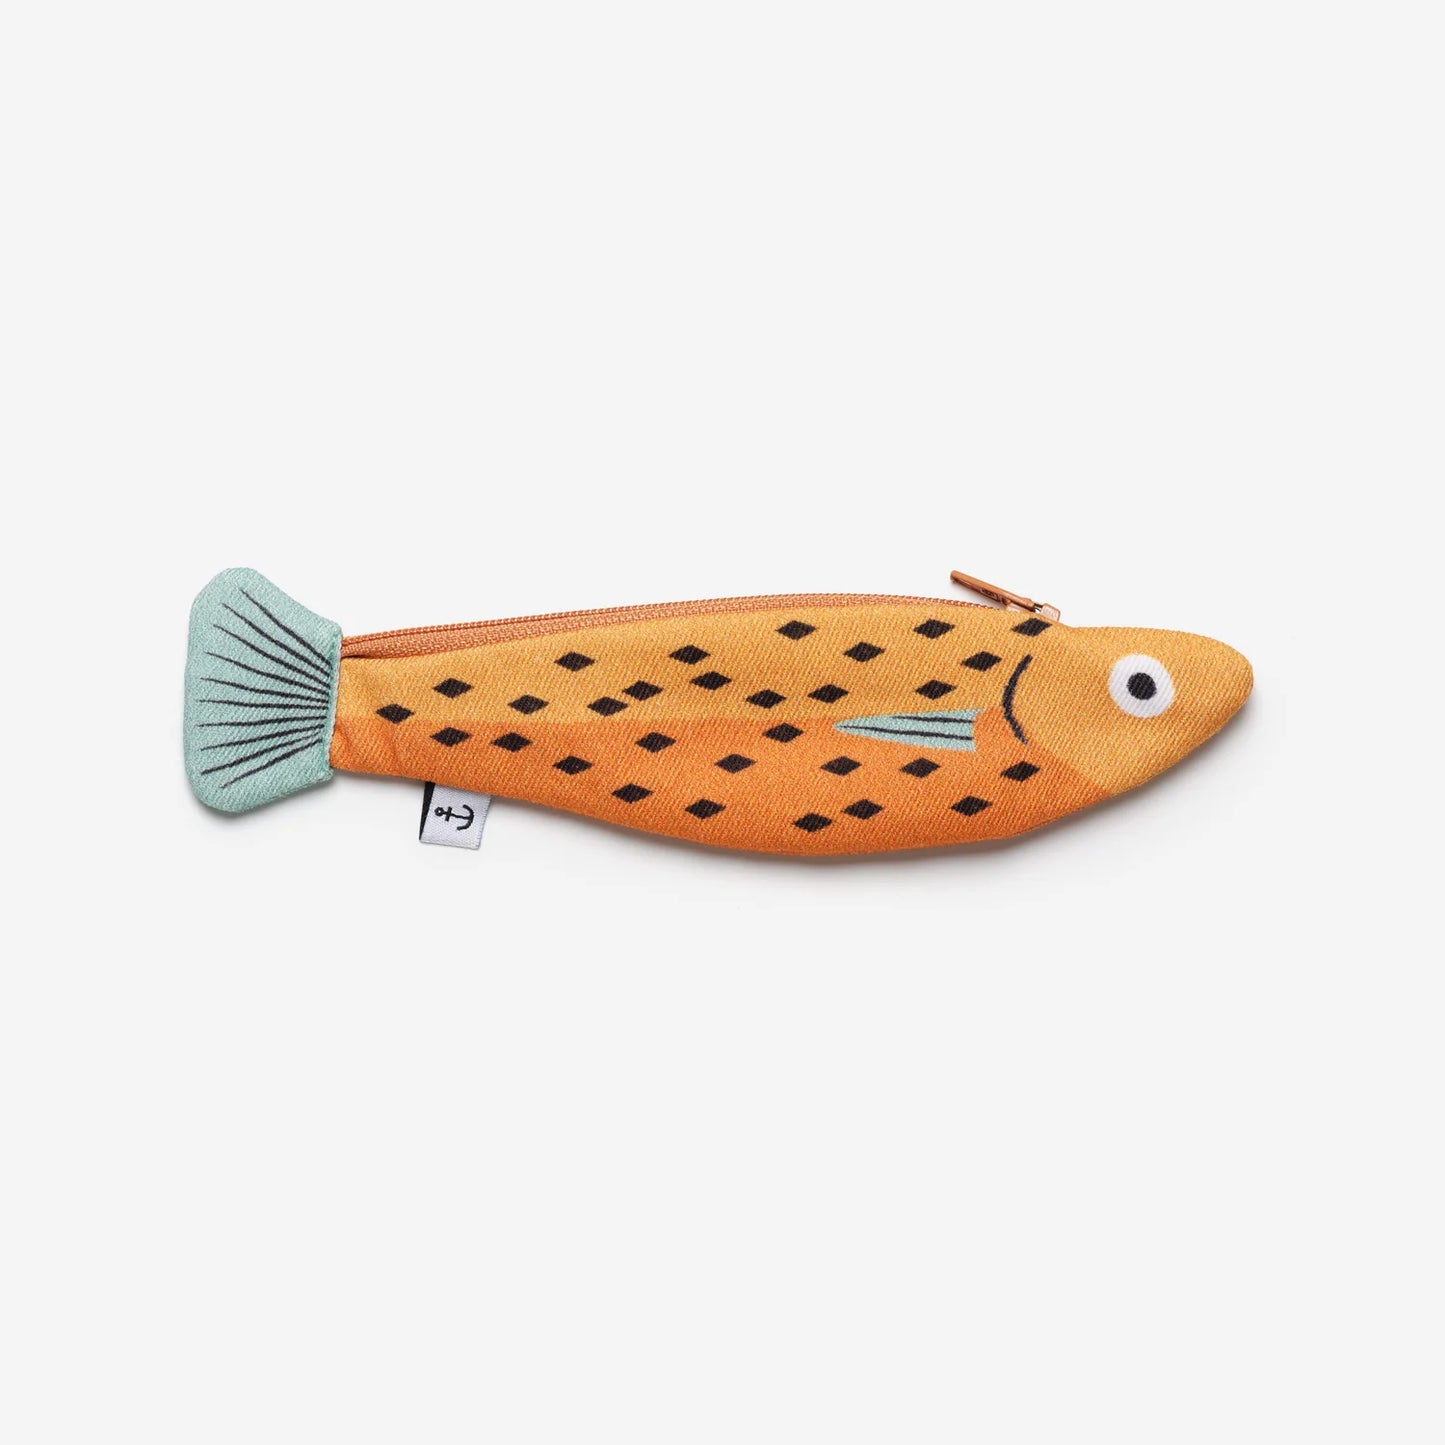 Small Whiting fish pouch in orange -- body is orange with black markings, fins are light blue with stripes